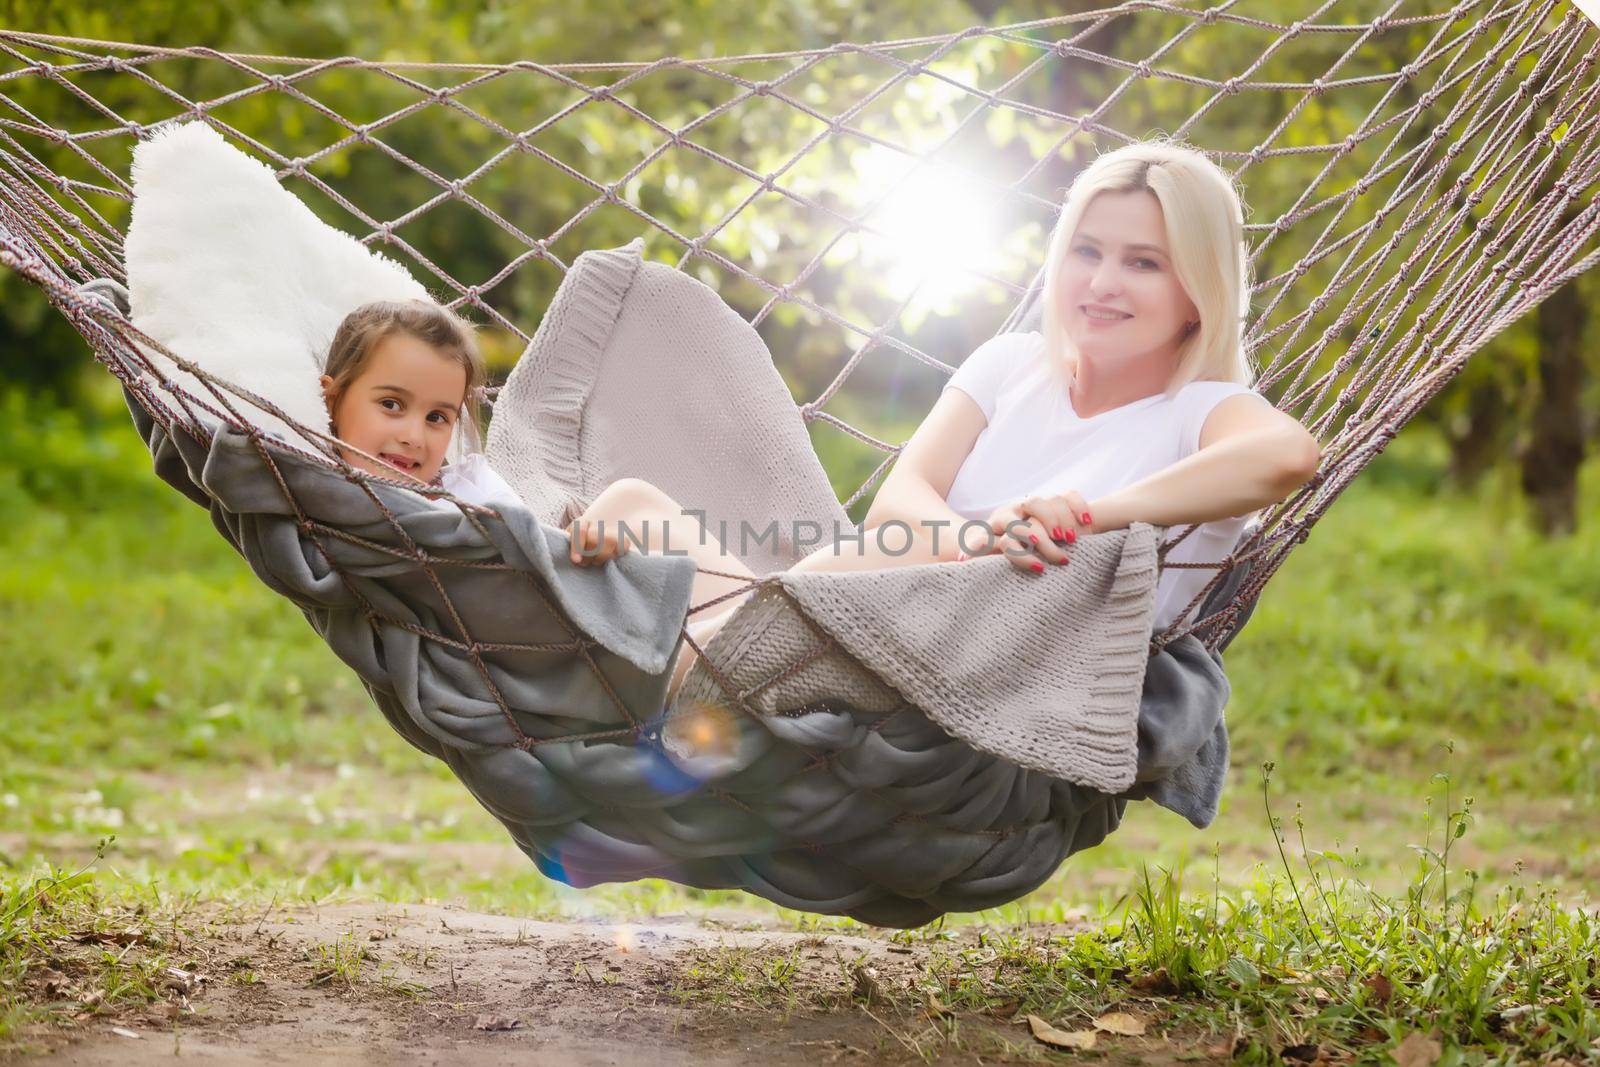 Mother And Daughter Sleeping In Garden Hammock Together by Andelov13